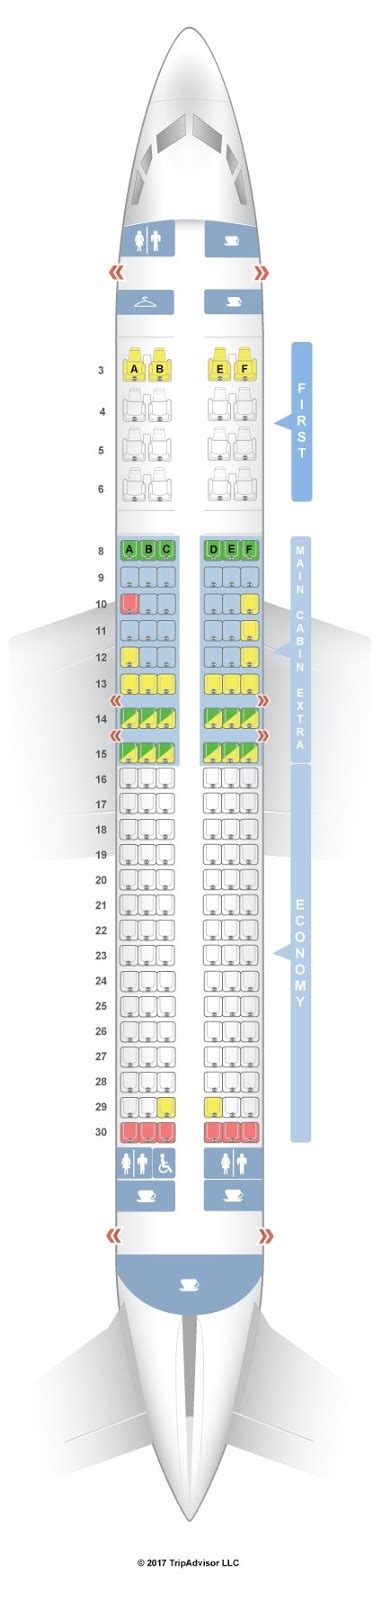 boeing 737 seat map american